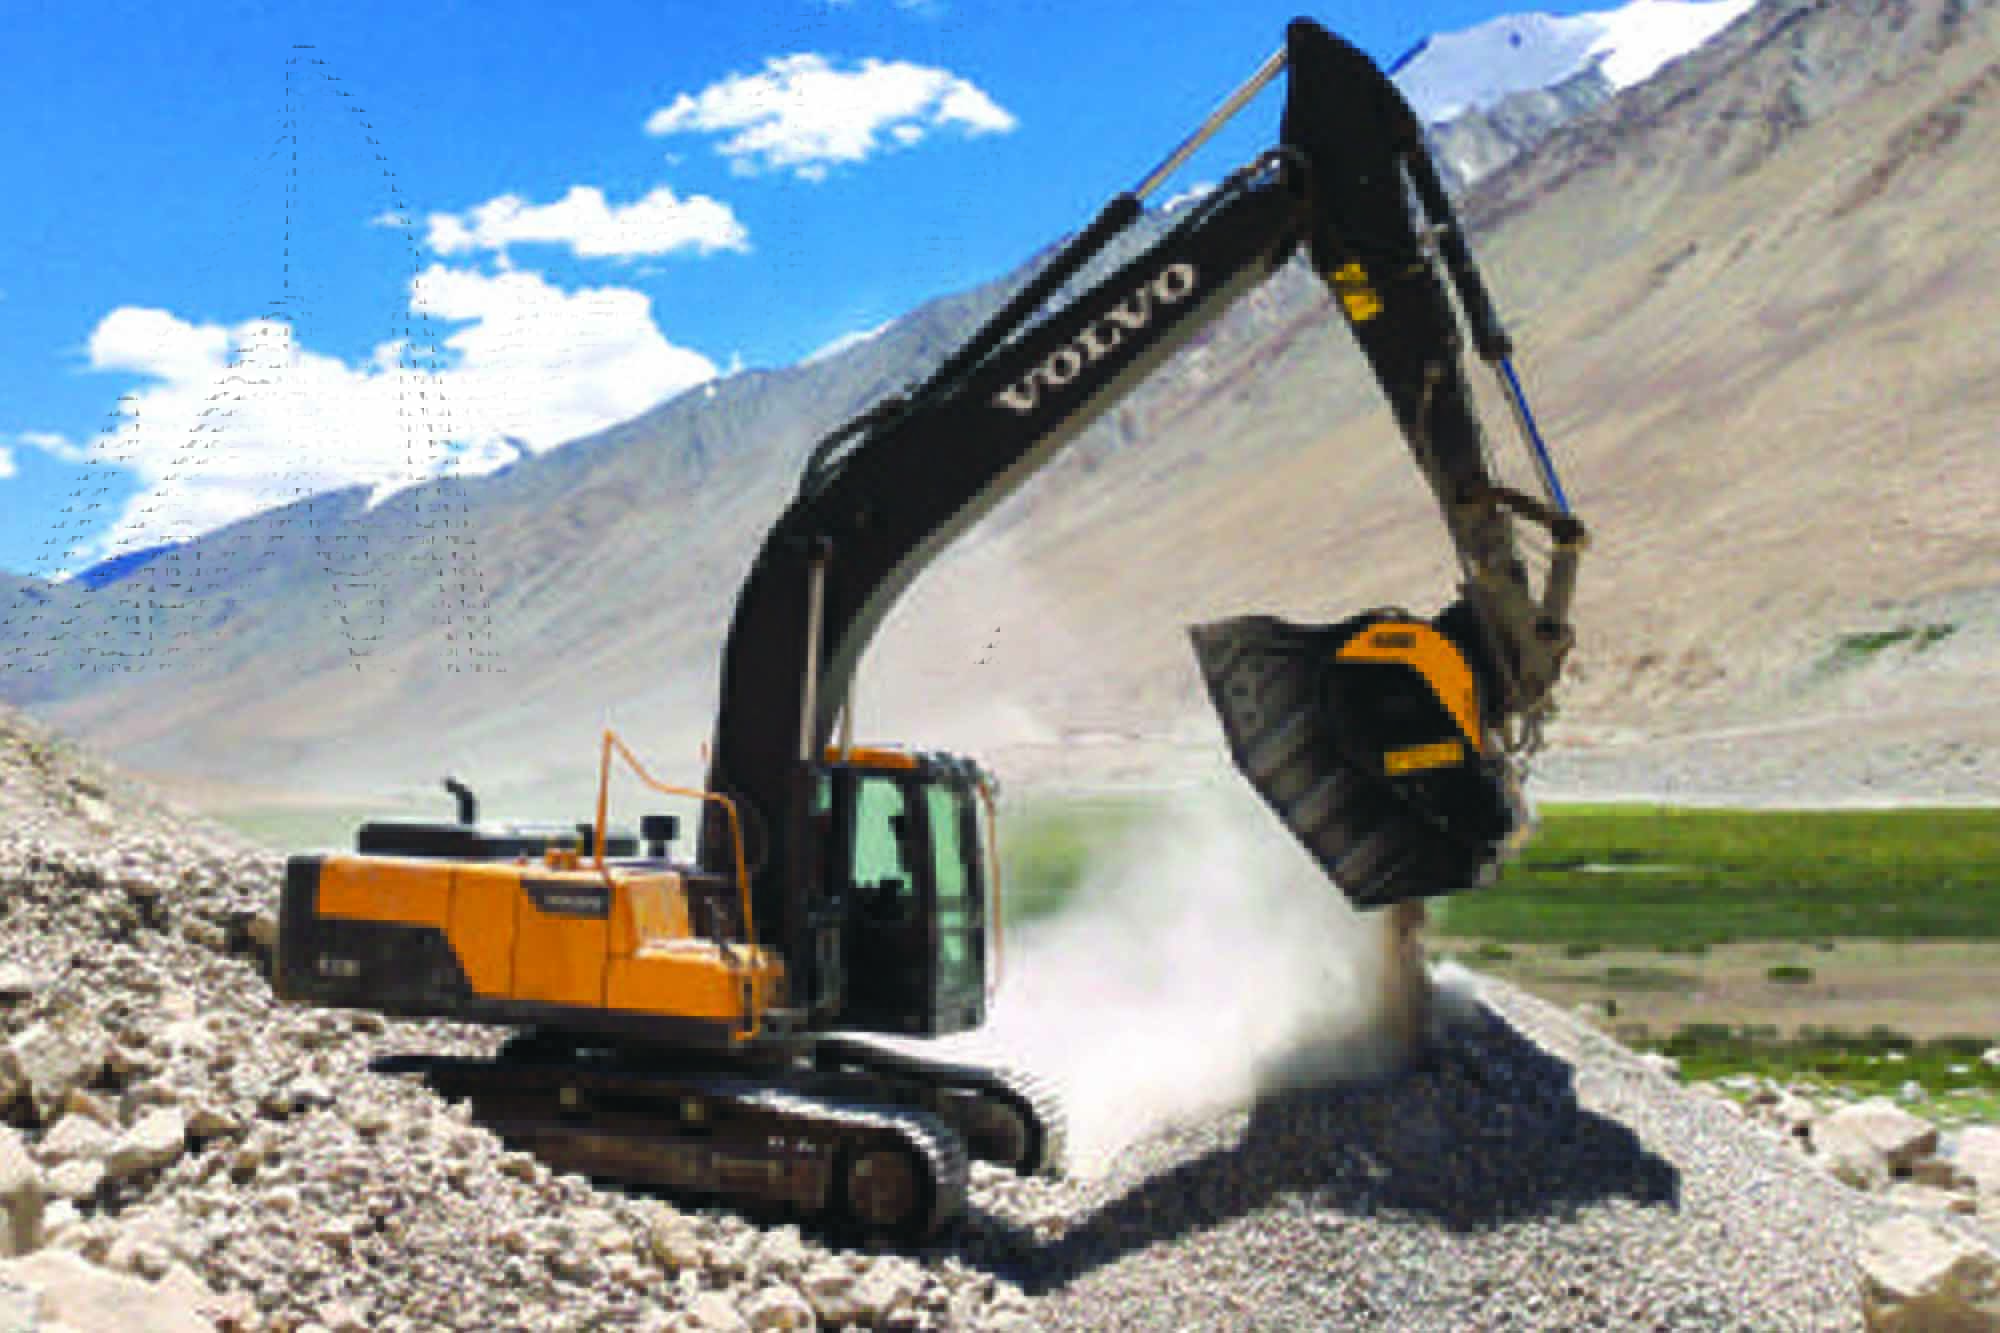 Incorporating advancements in crushing and screening technology, MB Crusher revolutionizes mineral processing operations by seamlessly transforming excavators or backhoe loaders into multifunctional units.